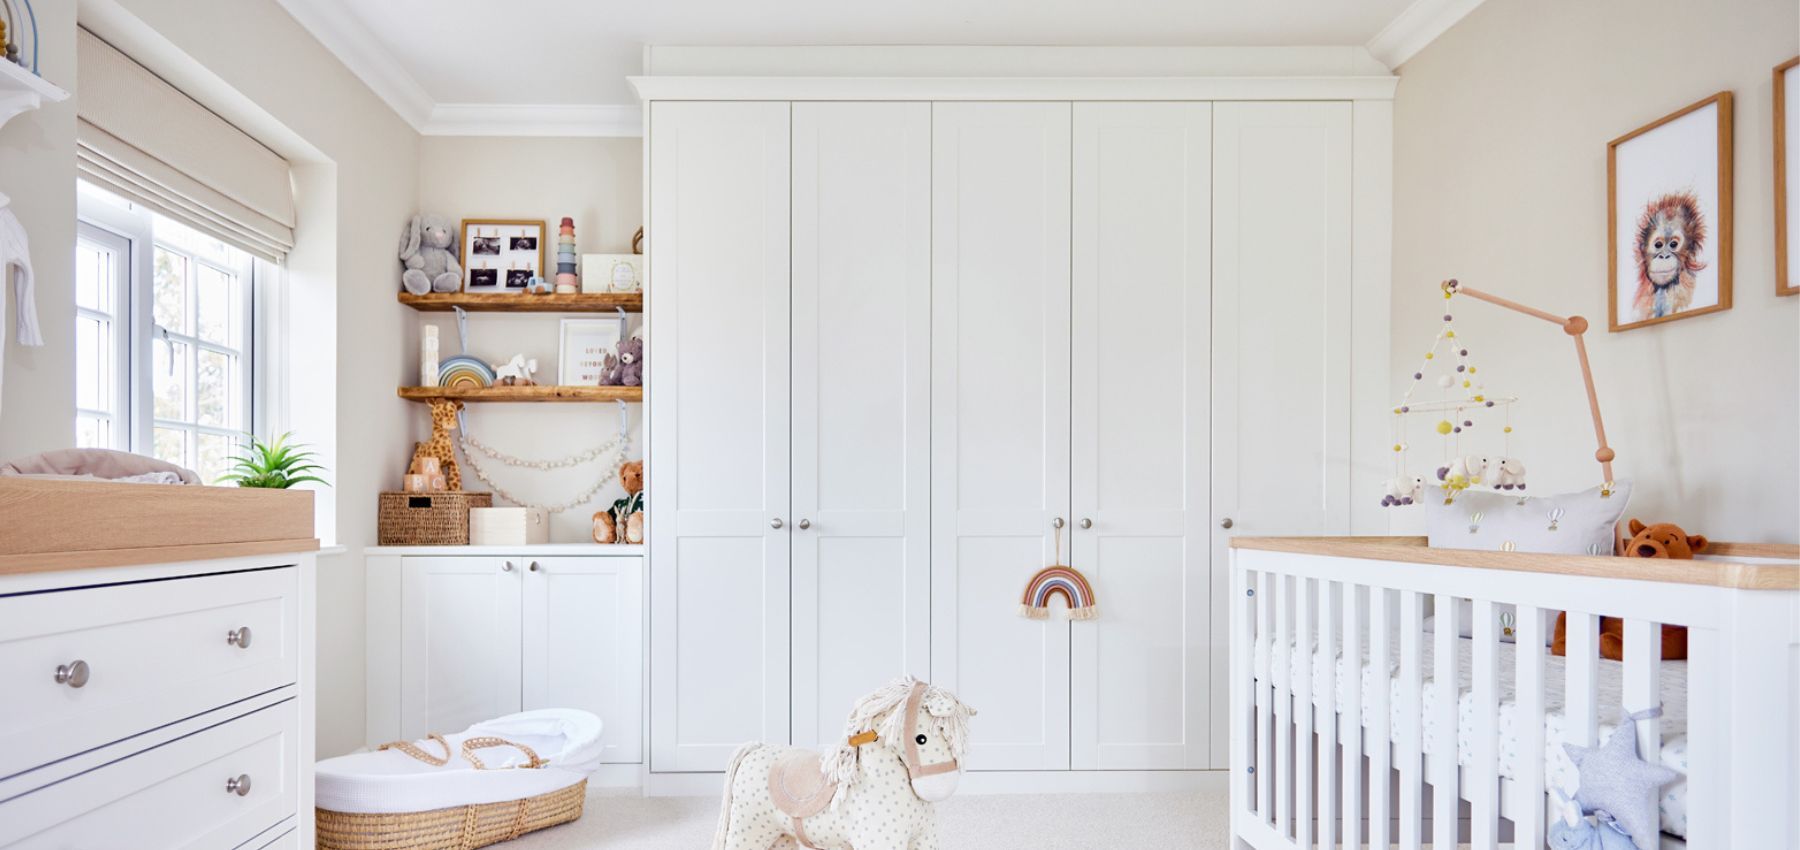 A Calming Nursery Space For Steph's Little Boy | Sharps For Nursery Wardrobes (View 6 of 15)